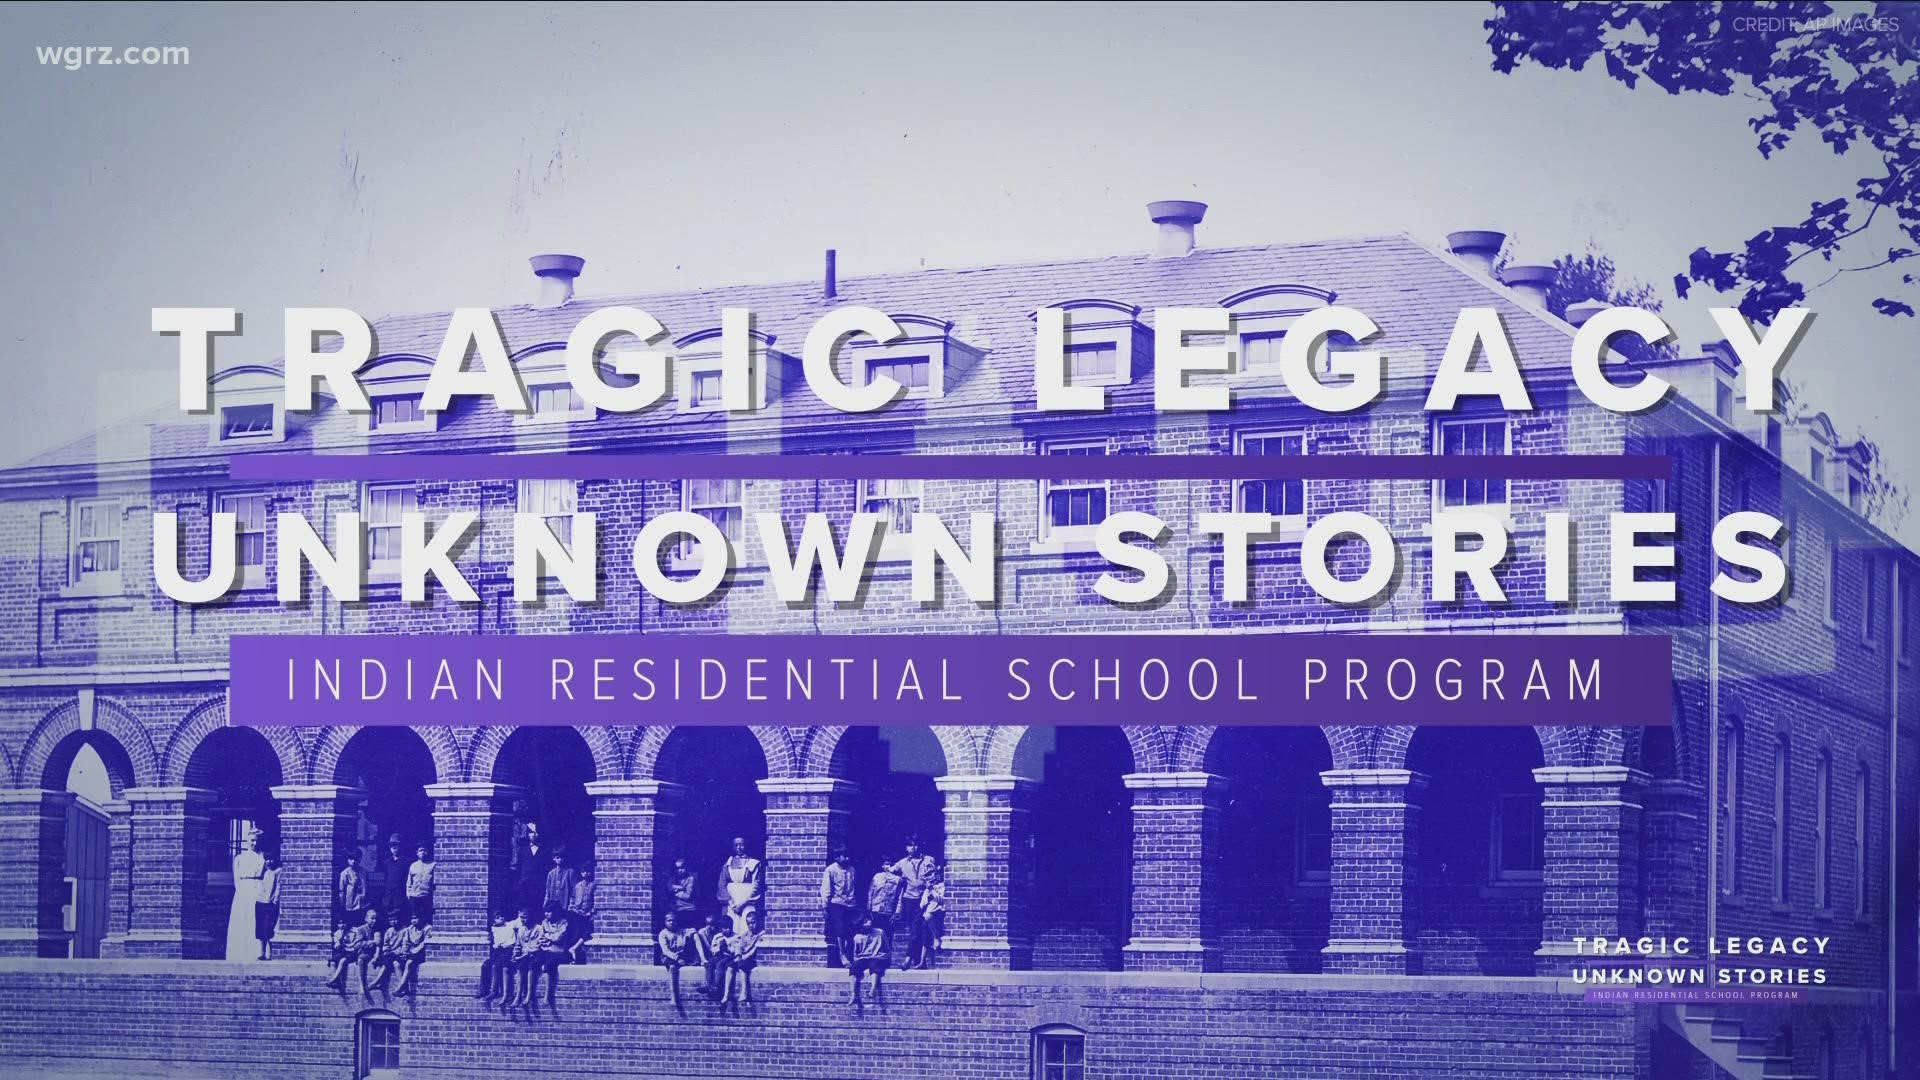 The unknown story of the Indian residential school program in the United States